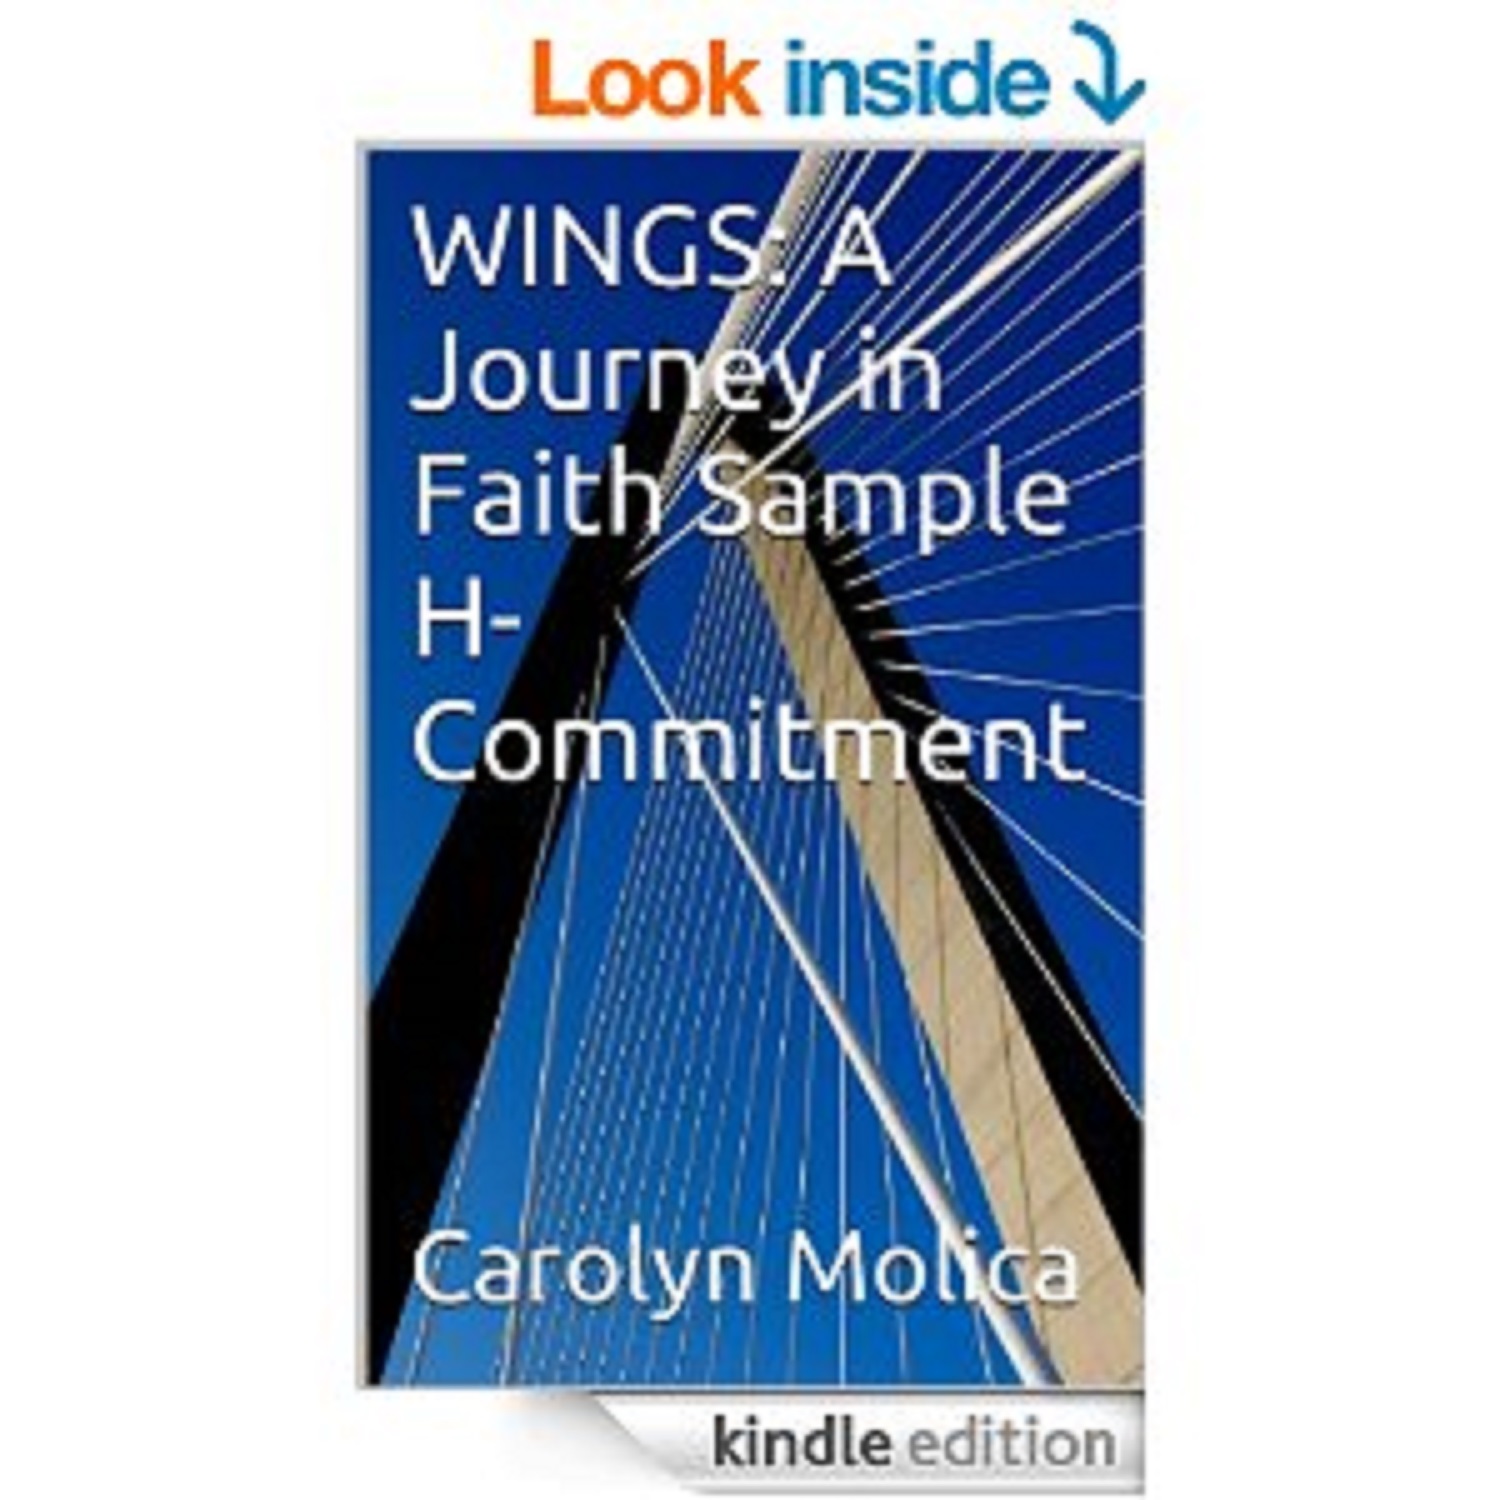 FREE: WINGS: A Journey in Faith Sample H- Commitment [Kindle Edition] by Carolyn Molica